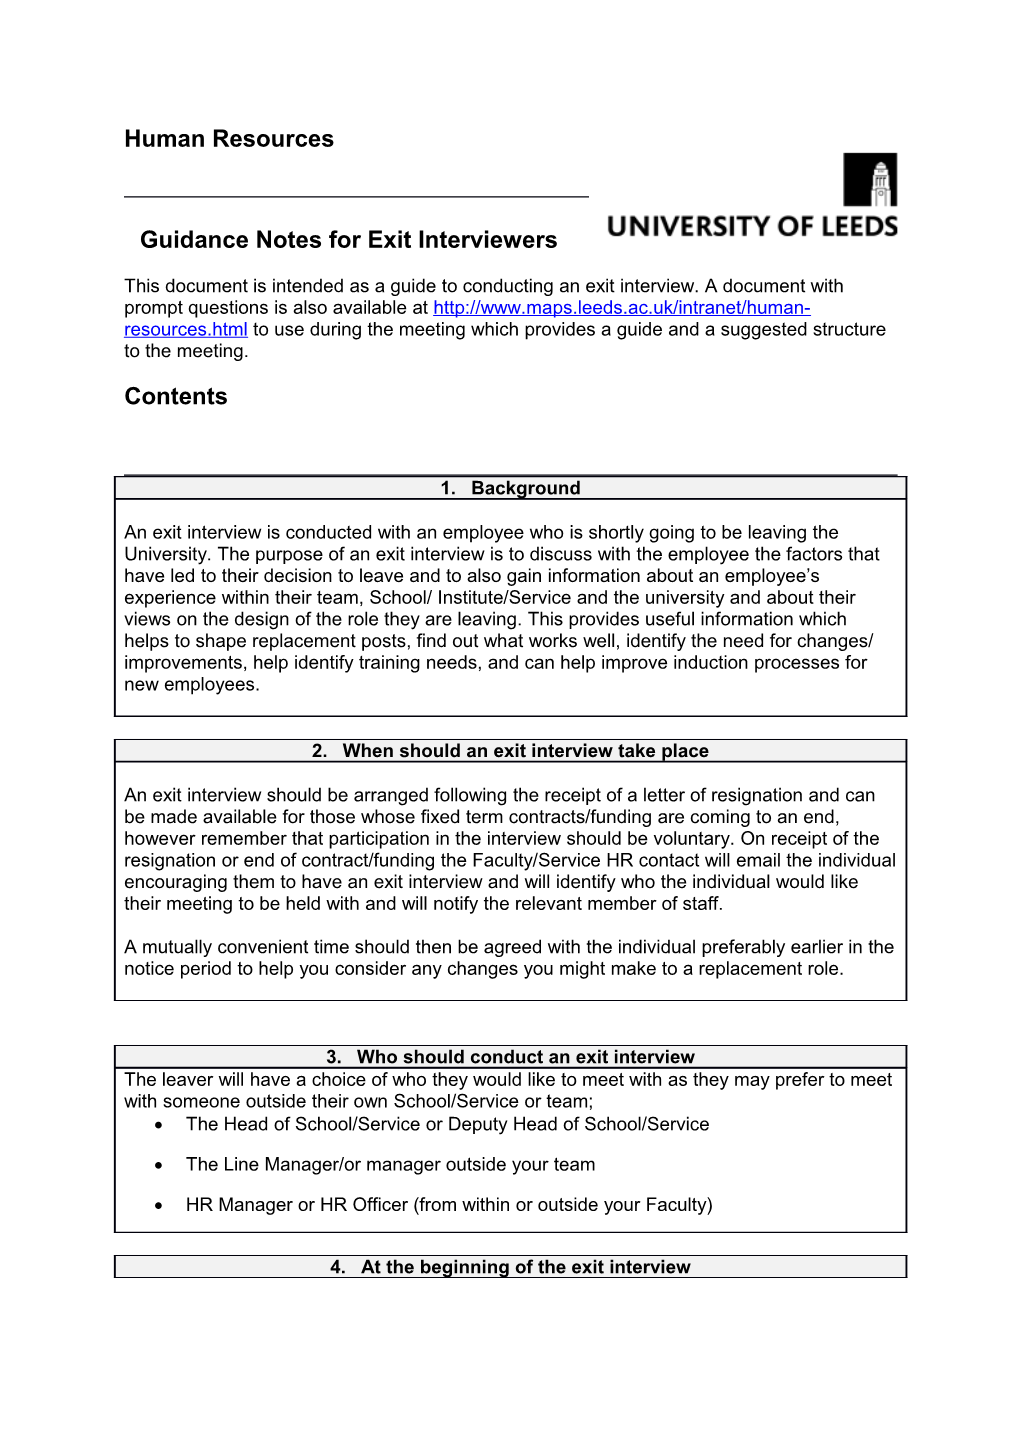 Guidance Notes for Exit Interviewers